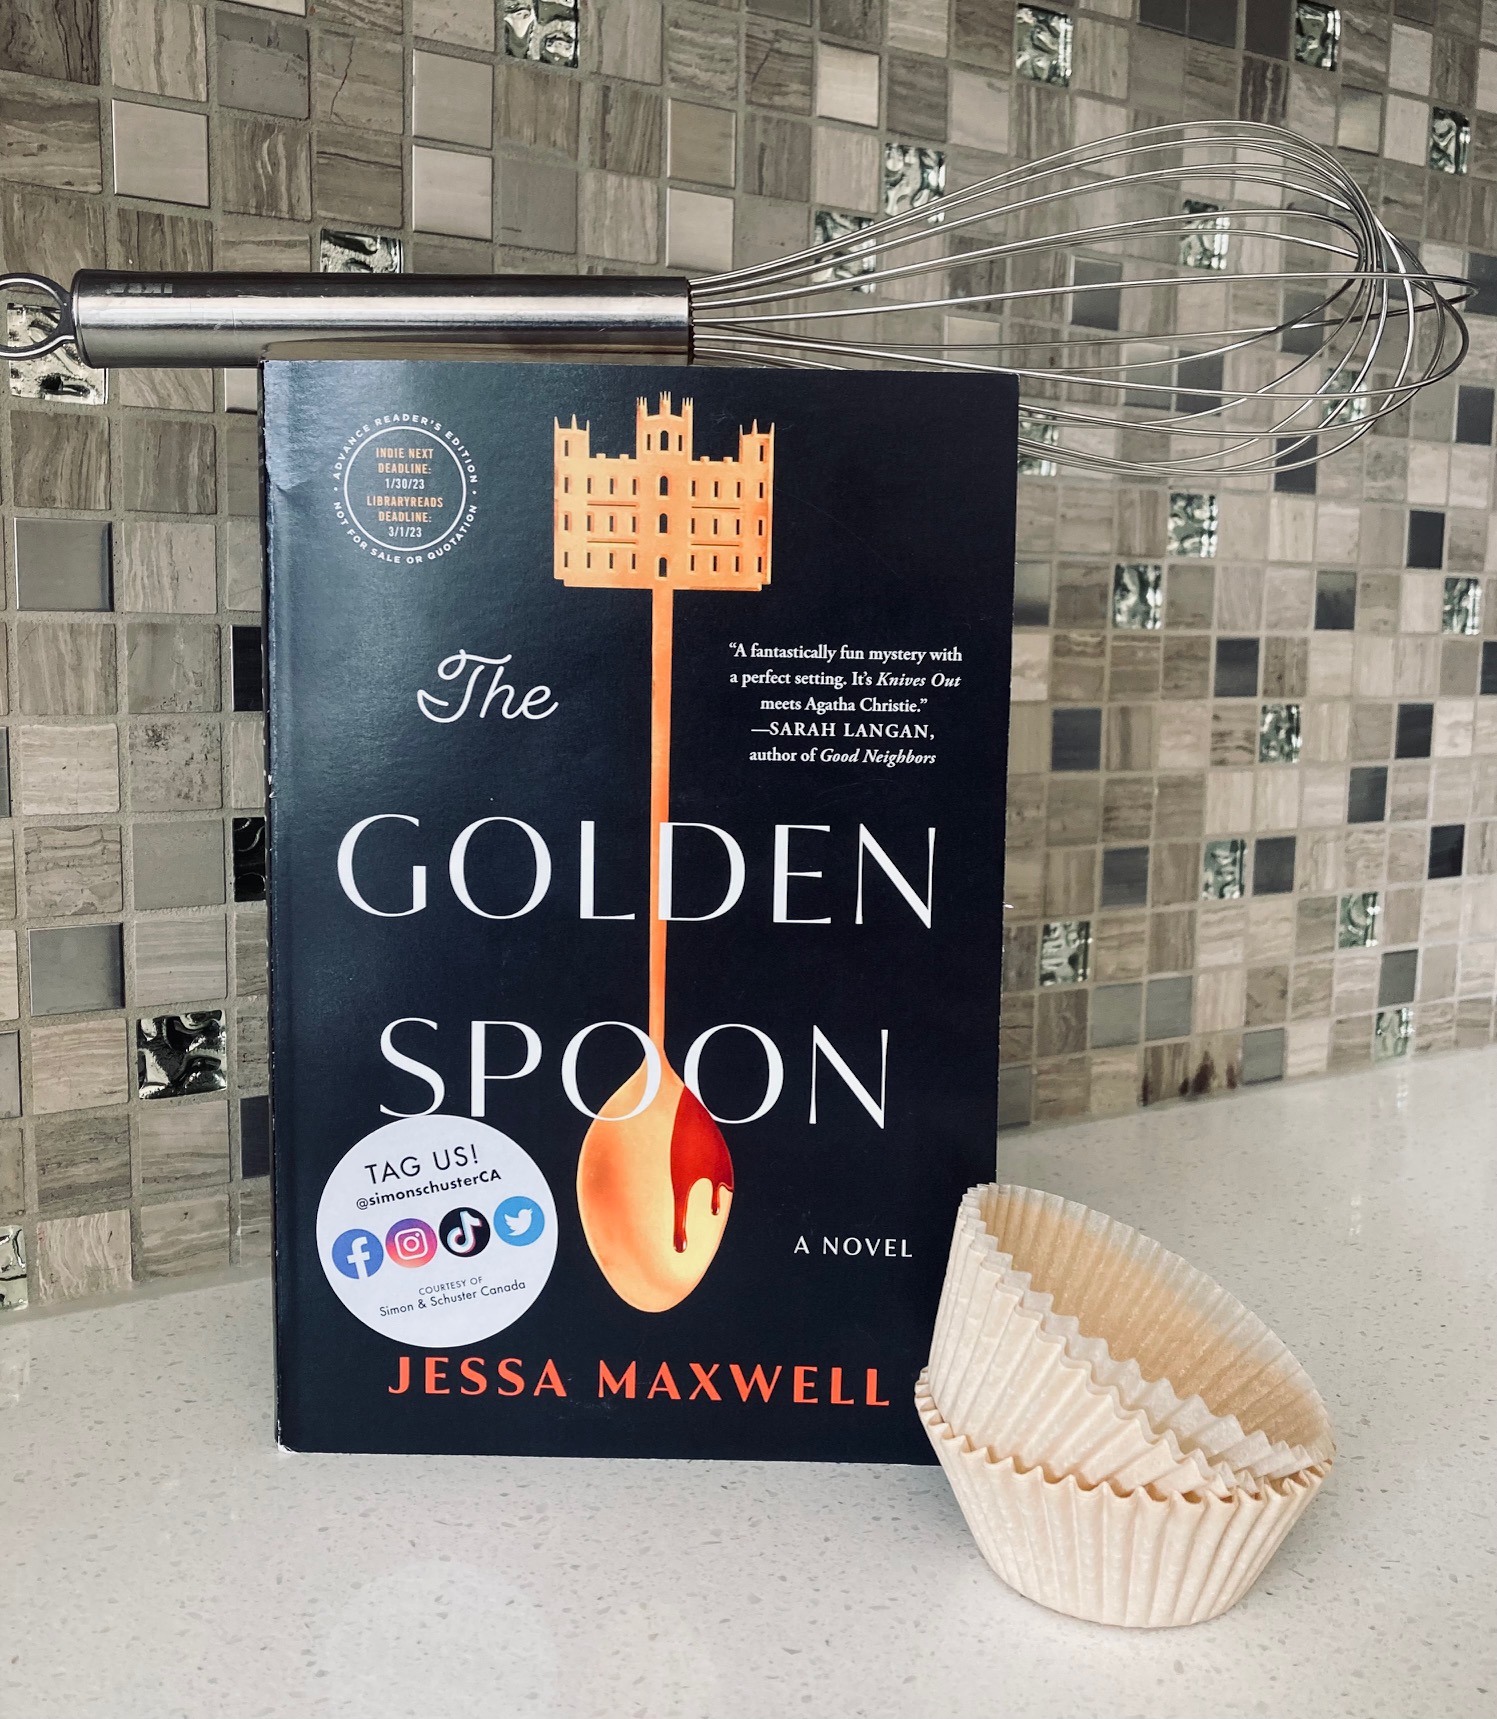 The Golden Spoon by Jessa Maxwell book pictured with paper cupcake liners next to it and a silver whisk on top on a white countertop